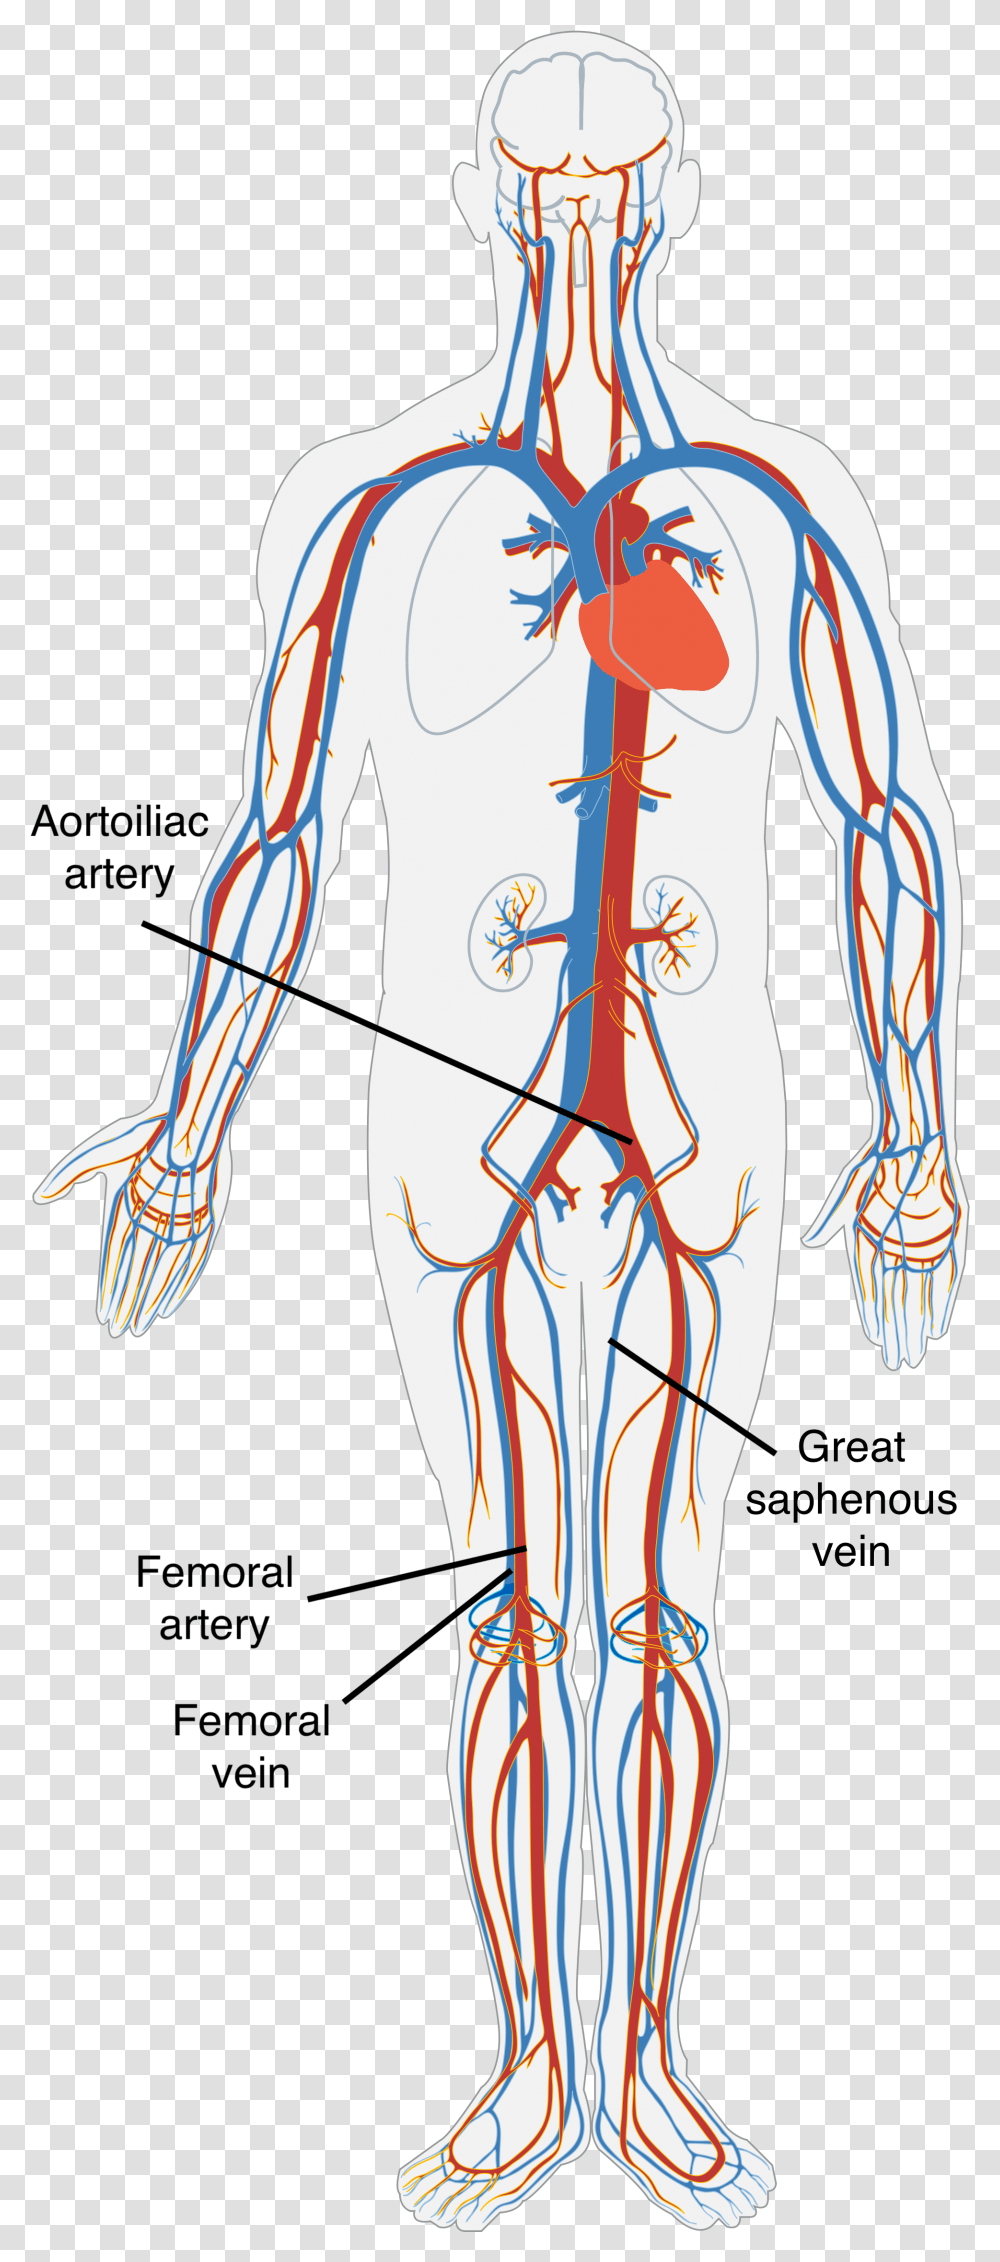 A Diagram Of The Human Circulatory System Blood Flow And Gas Exchange, Veins, Person, Plot Transparent Png